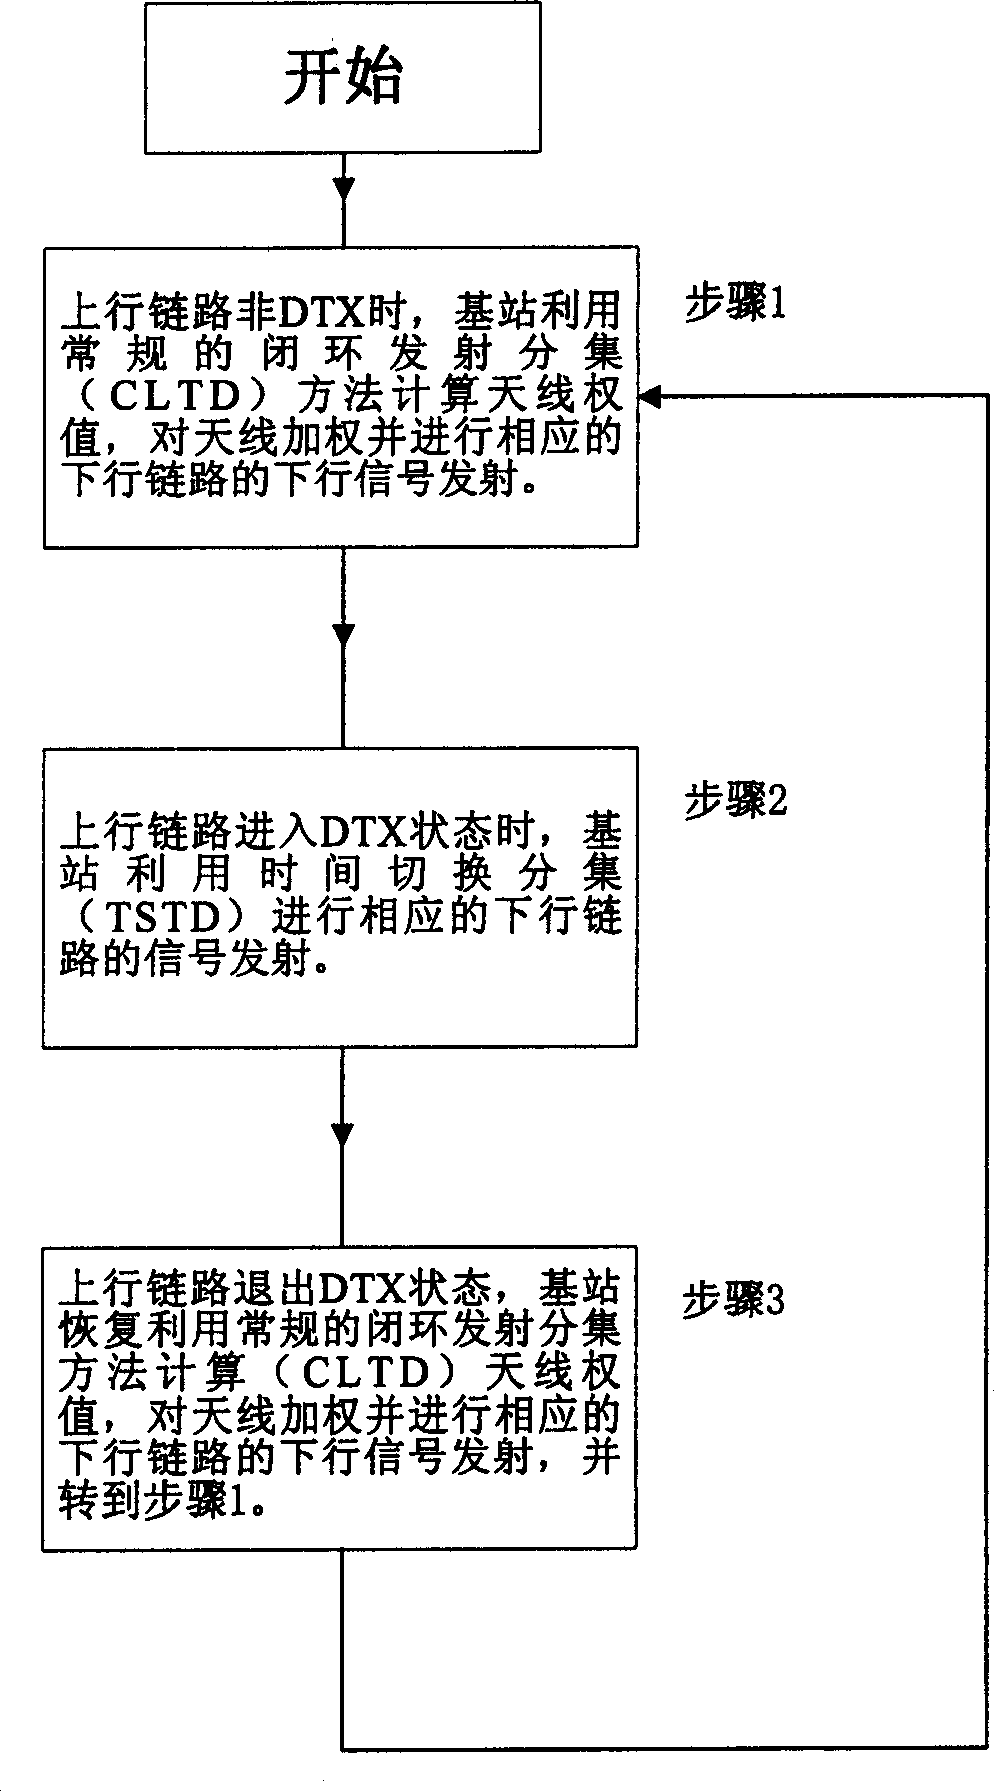 Downlink transmitting and diversity method for supporting uplink discontinuous transmitting wireless system